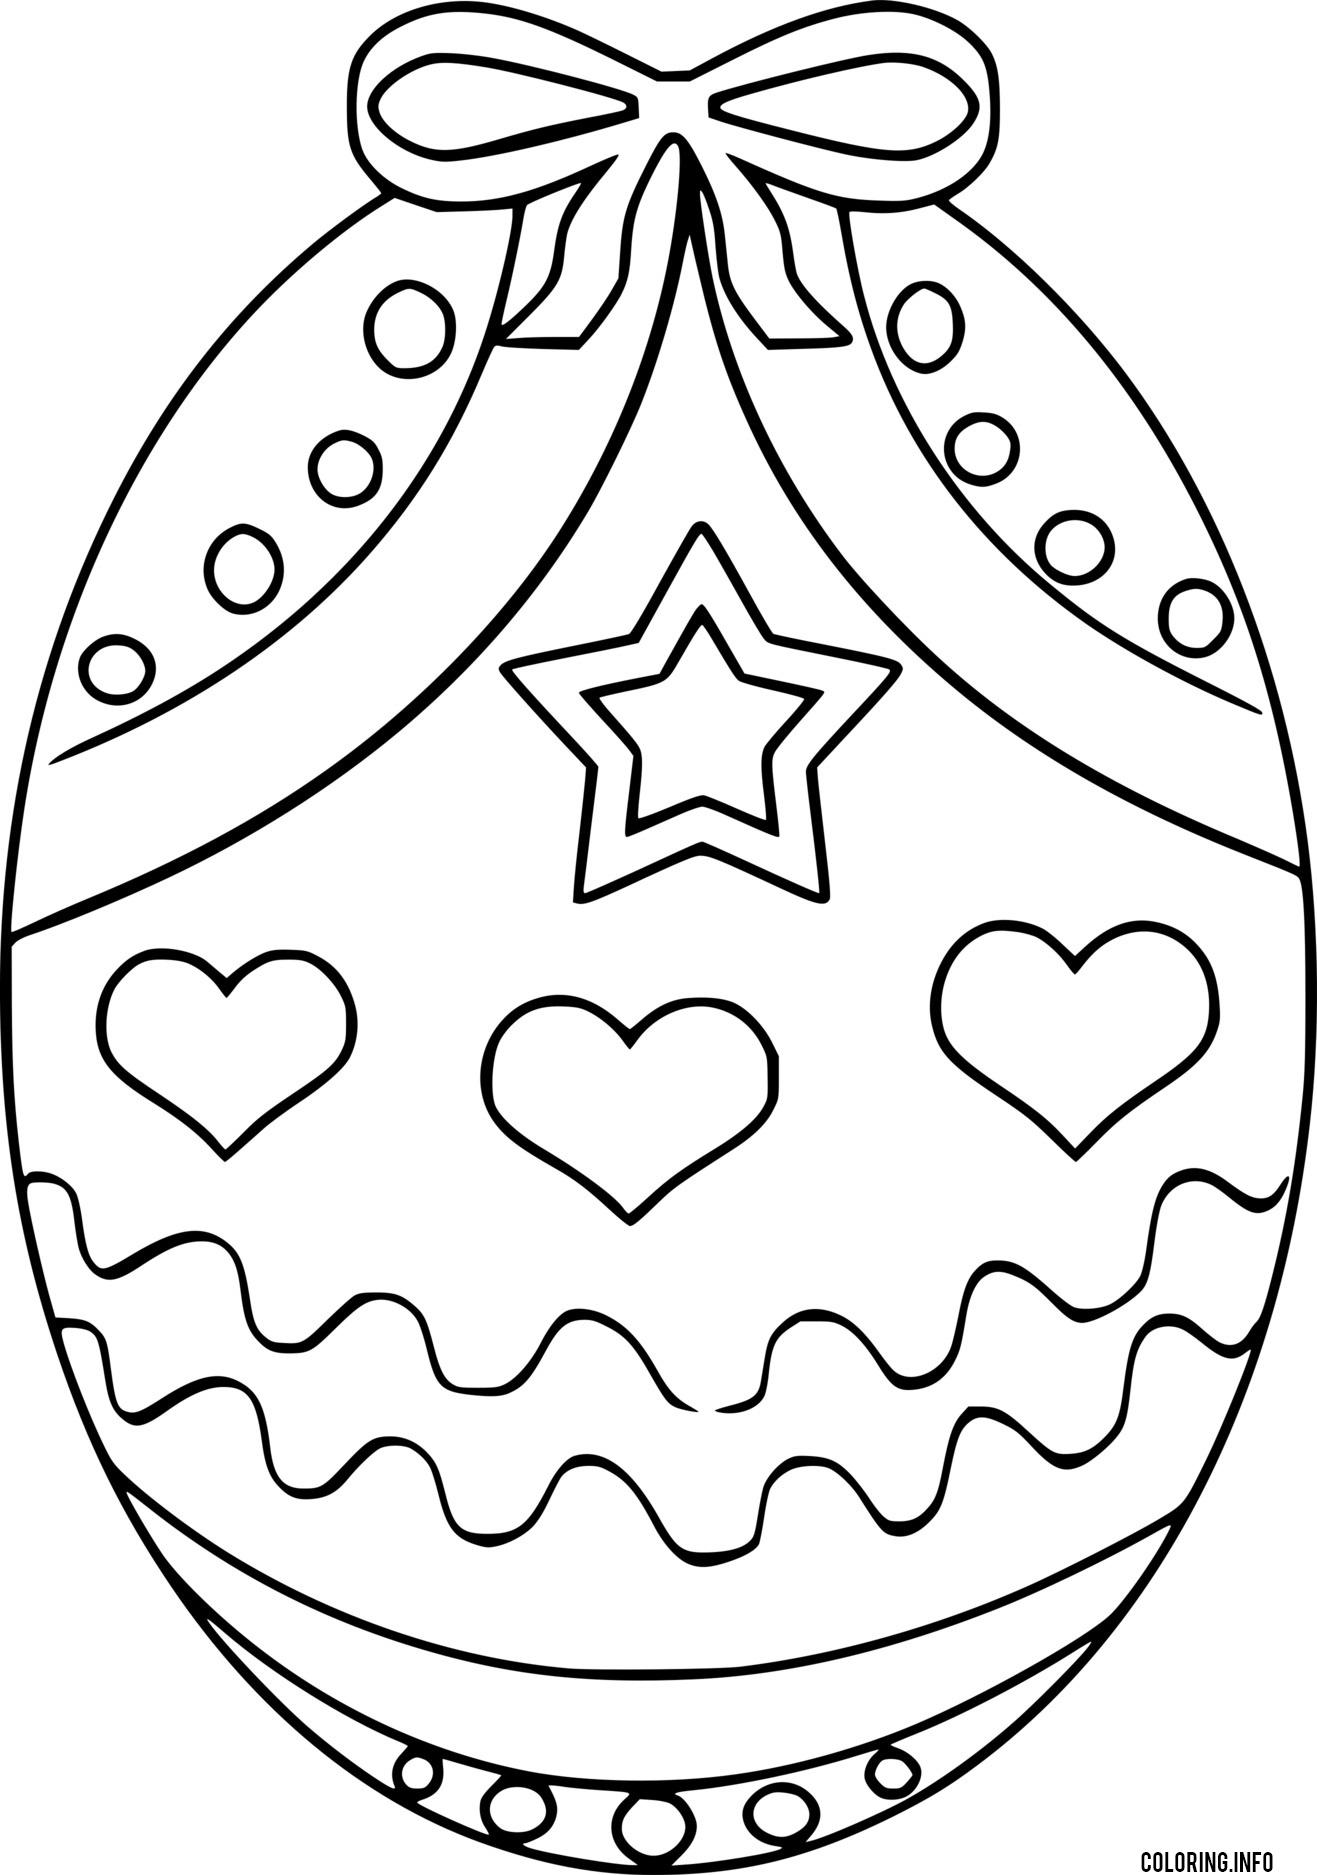 Bowknot Easter Egg coloring